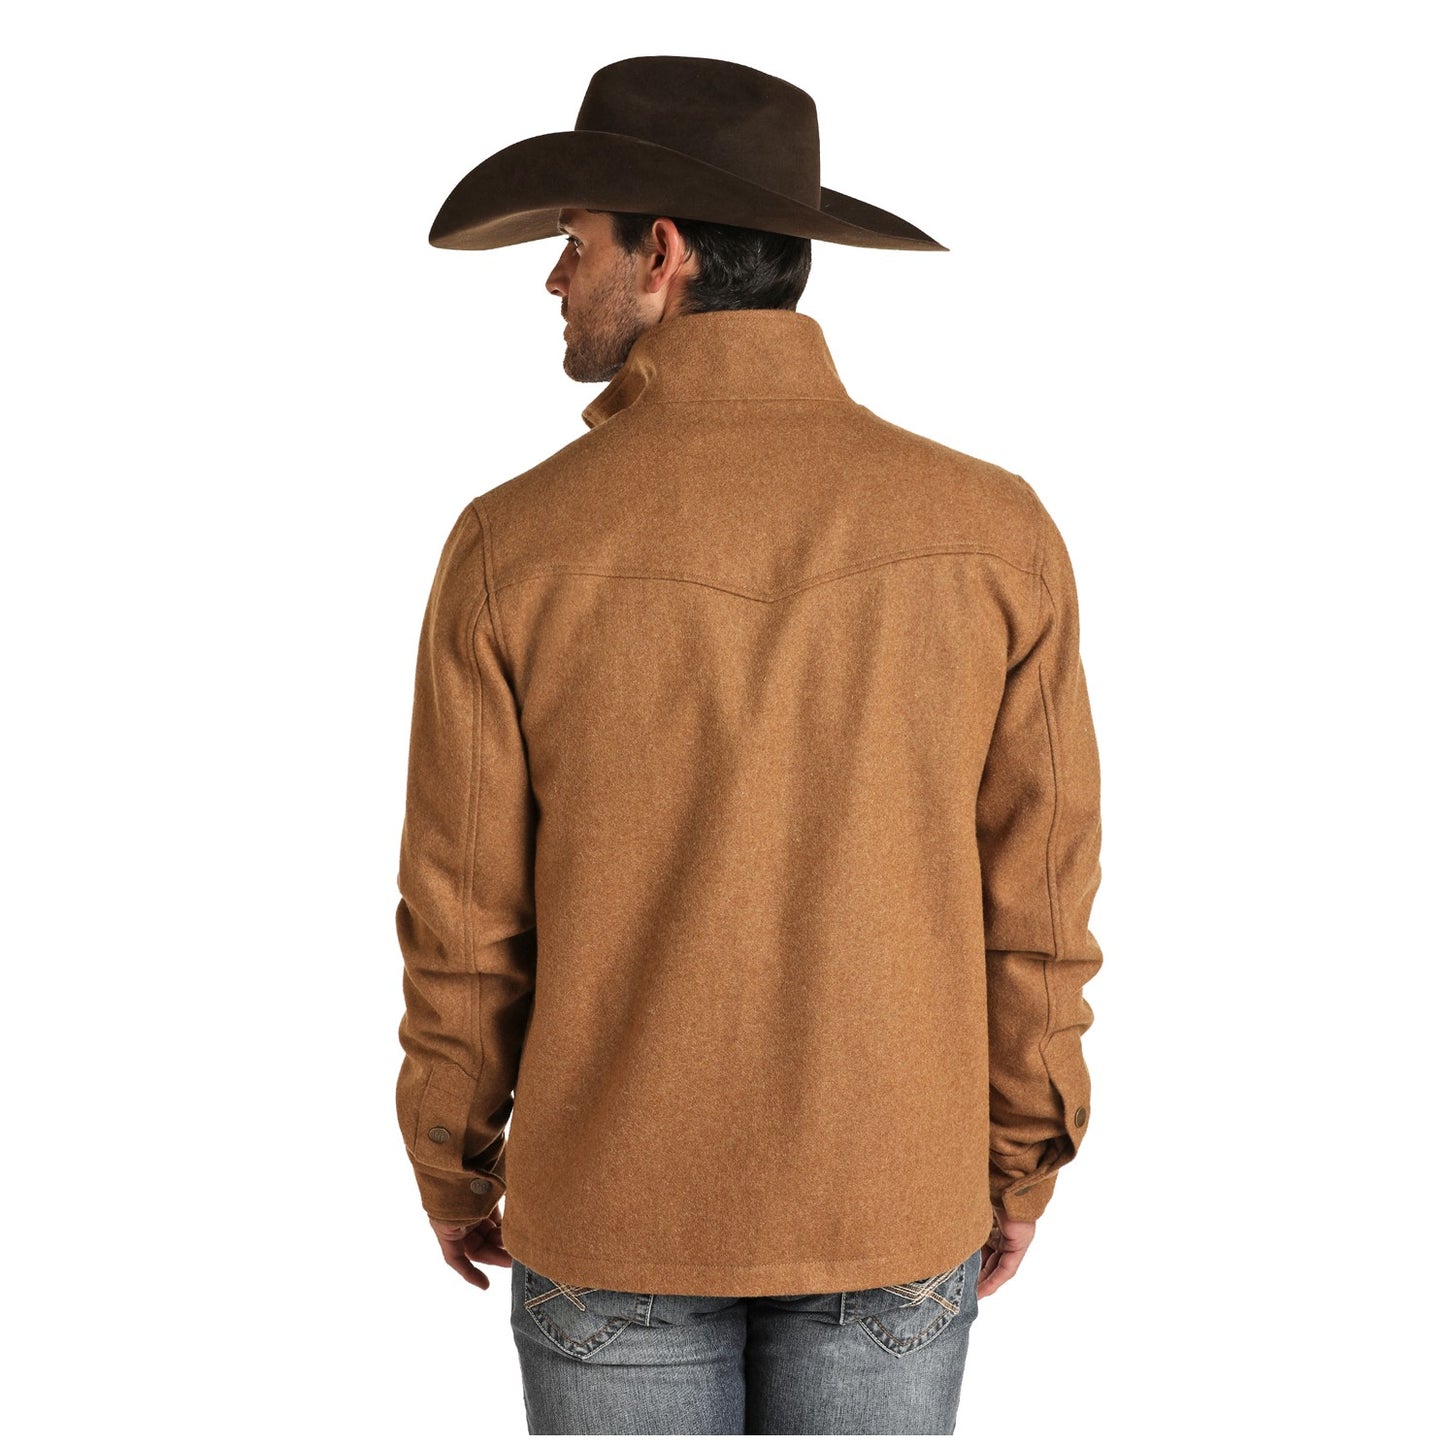 Powder River Outfitters Men's Solid Wool Camel Coat Jacket 92-1012-25